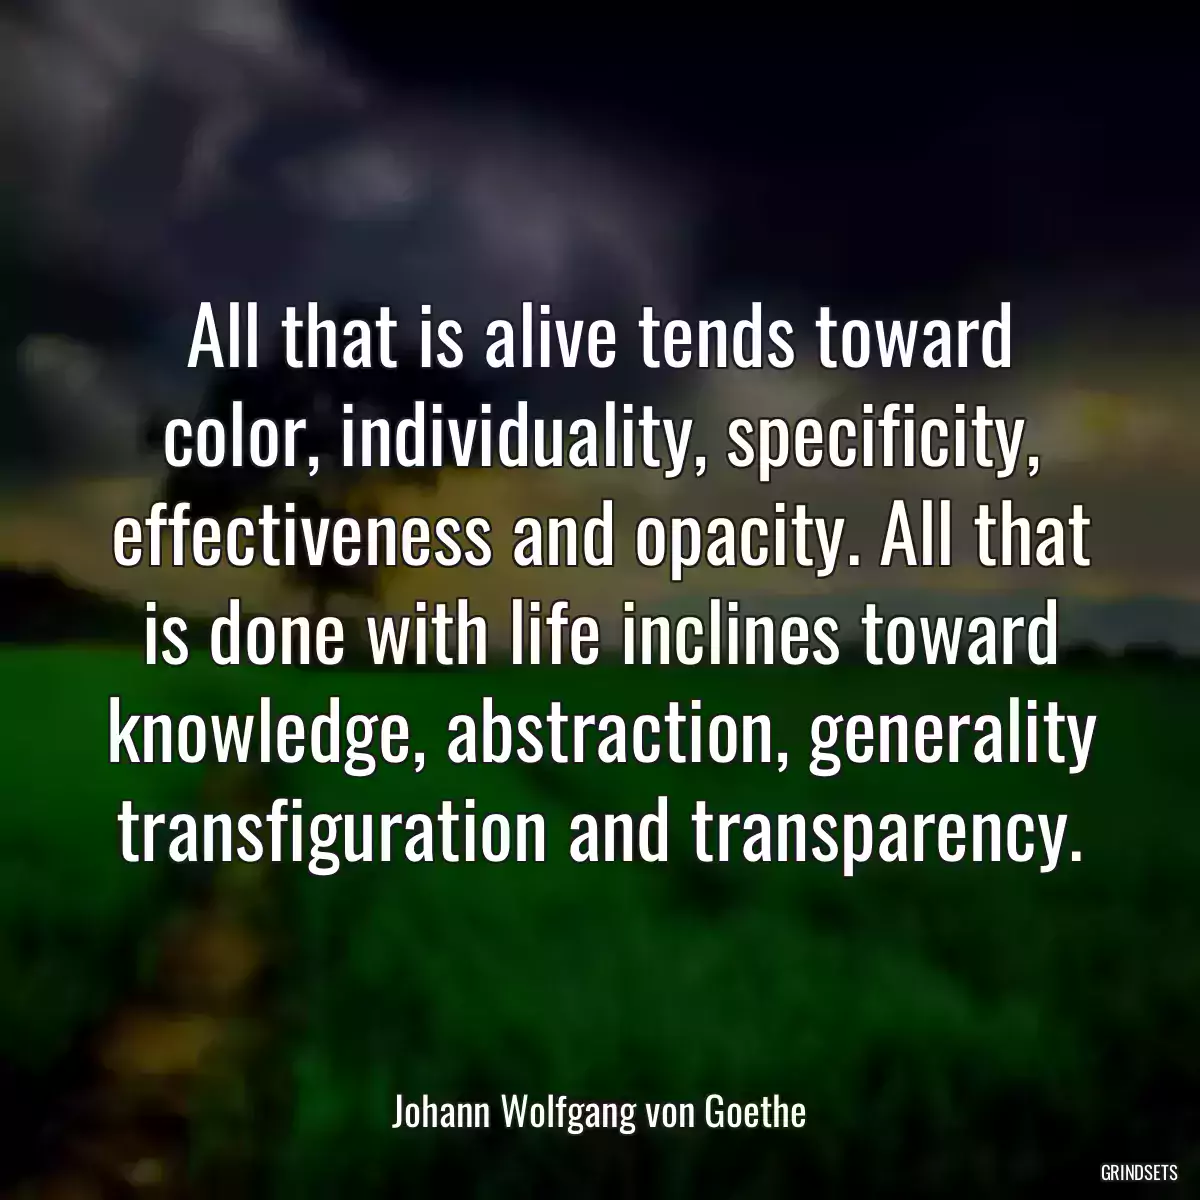 All that is alive tends toward color, individuality, specificity, effectiveness and opacity. All that is done with life inclines toward knowledge, abstraction, generality transfiguration and transparency.